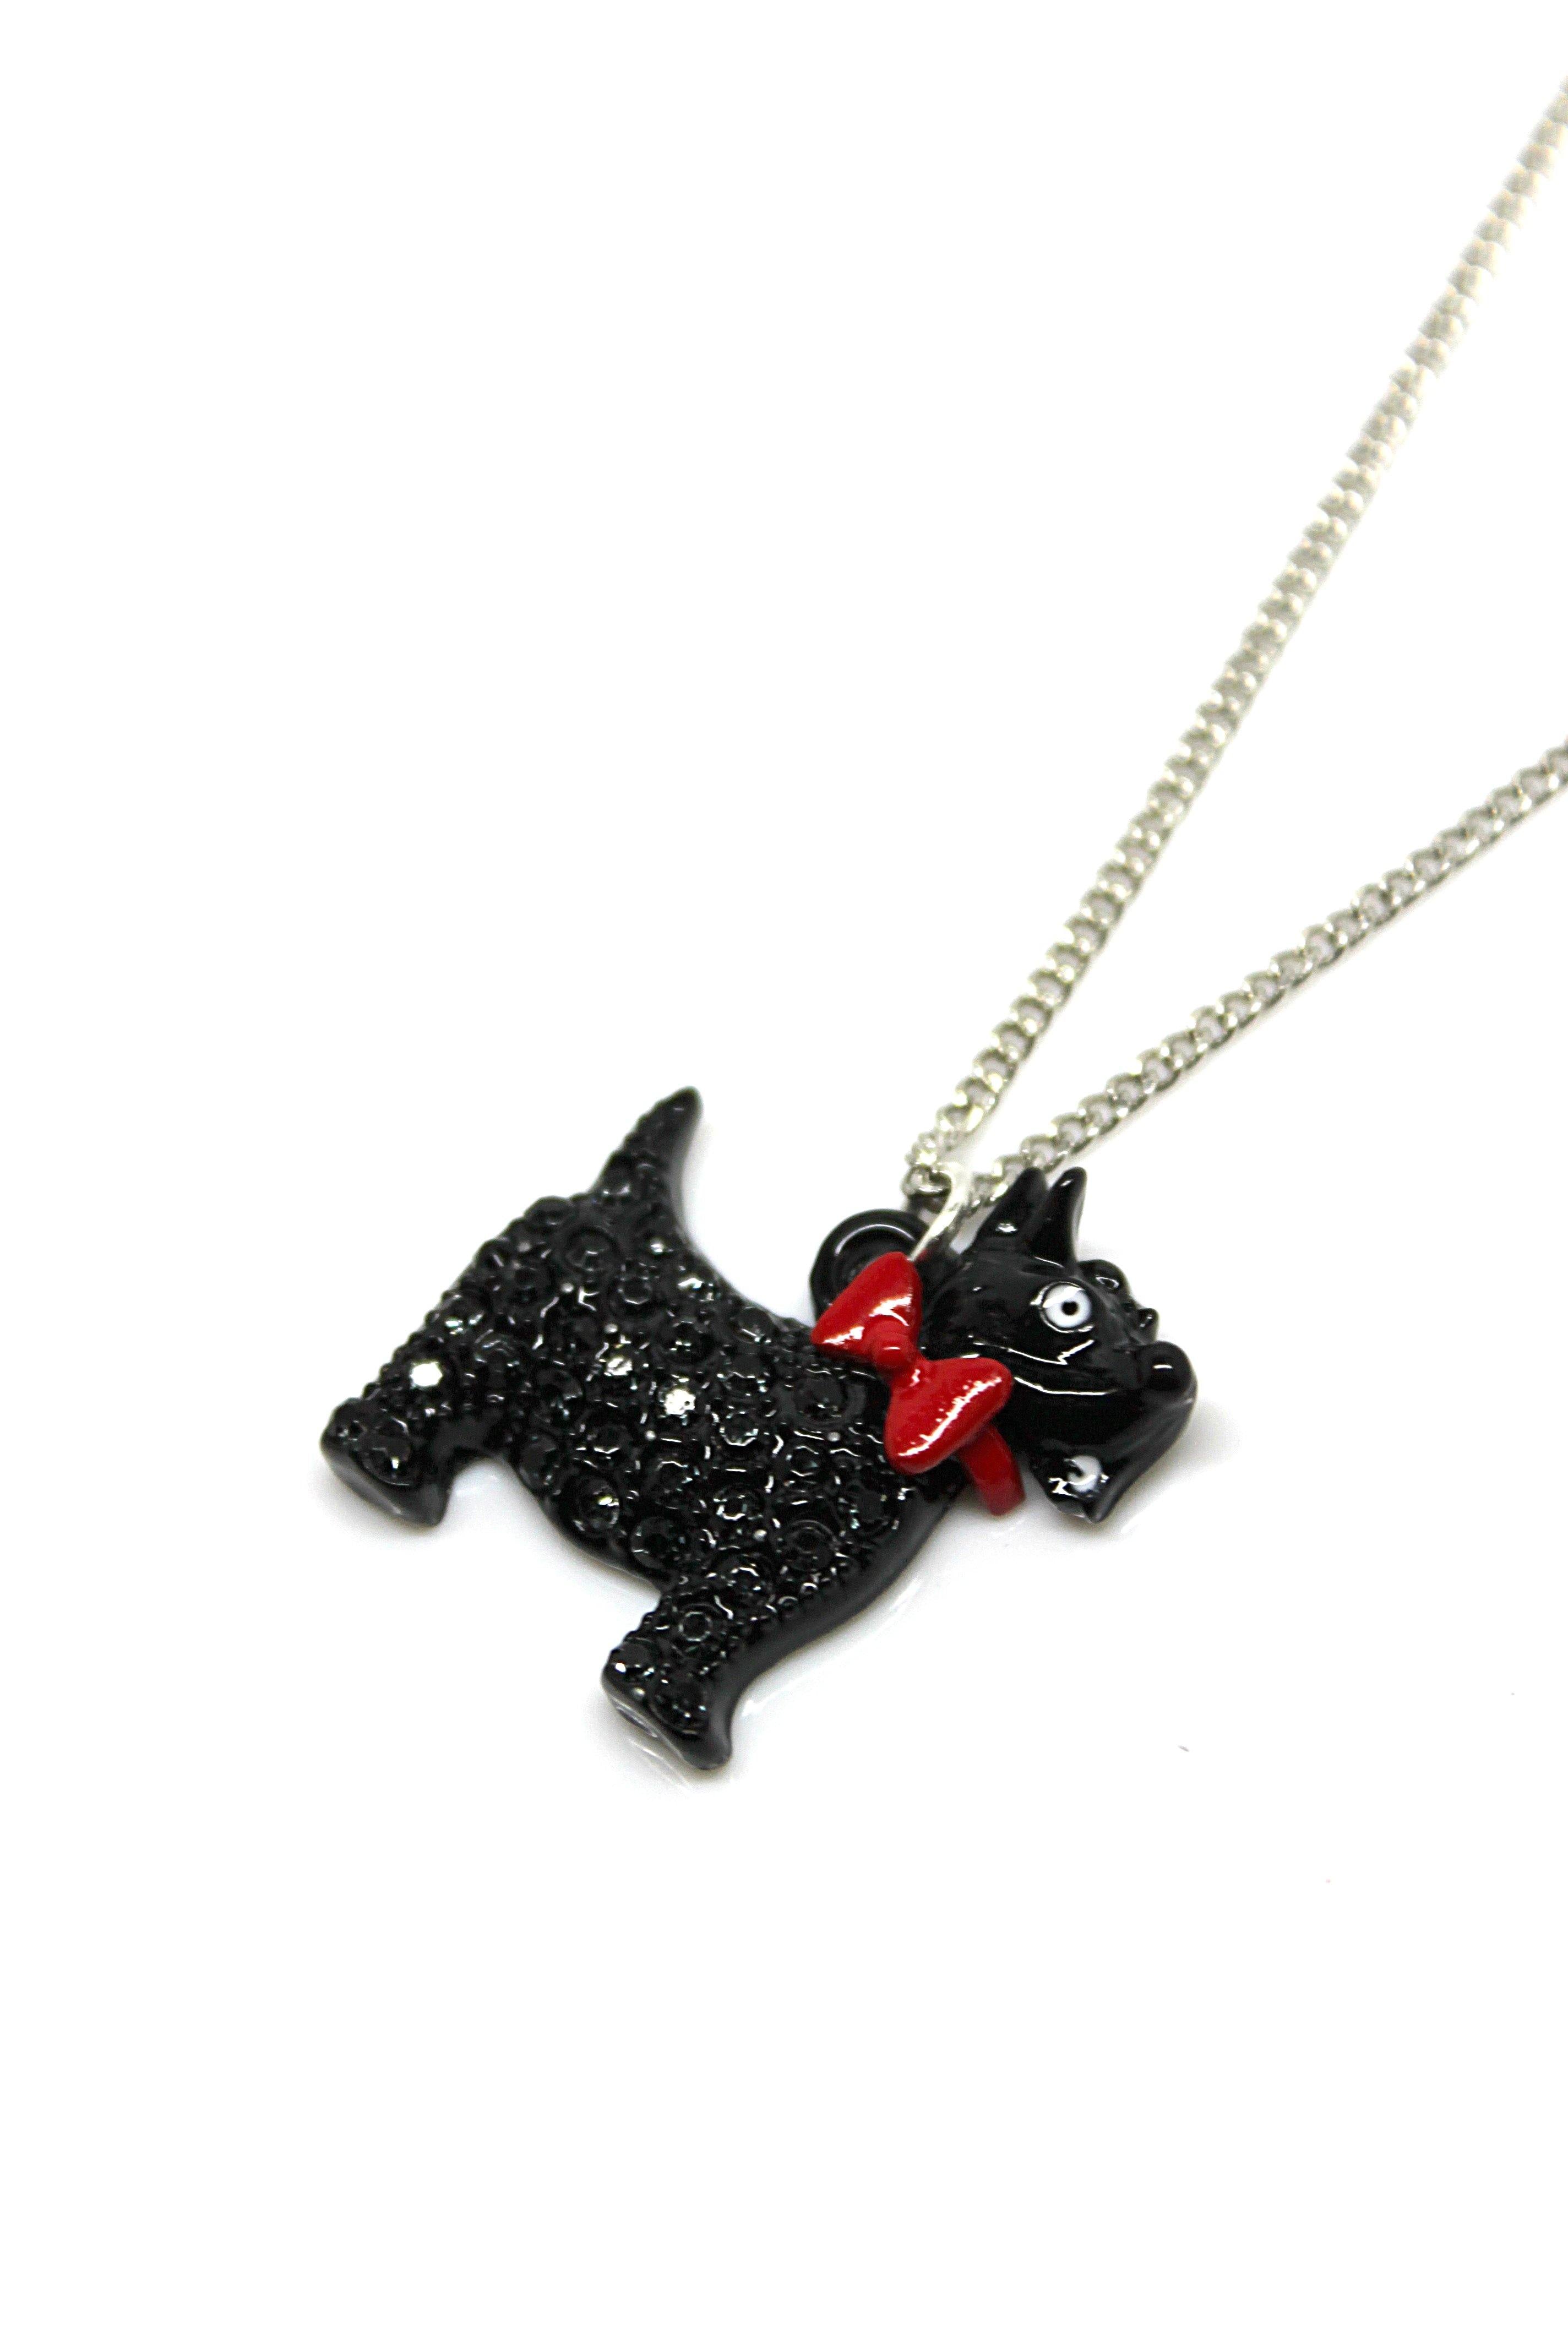 Scotty Dog Necklace - Wildtouch - Wildtouch